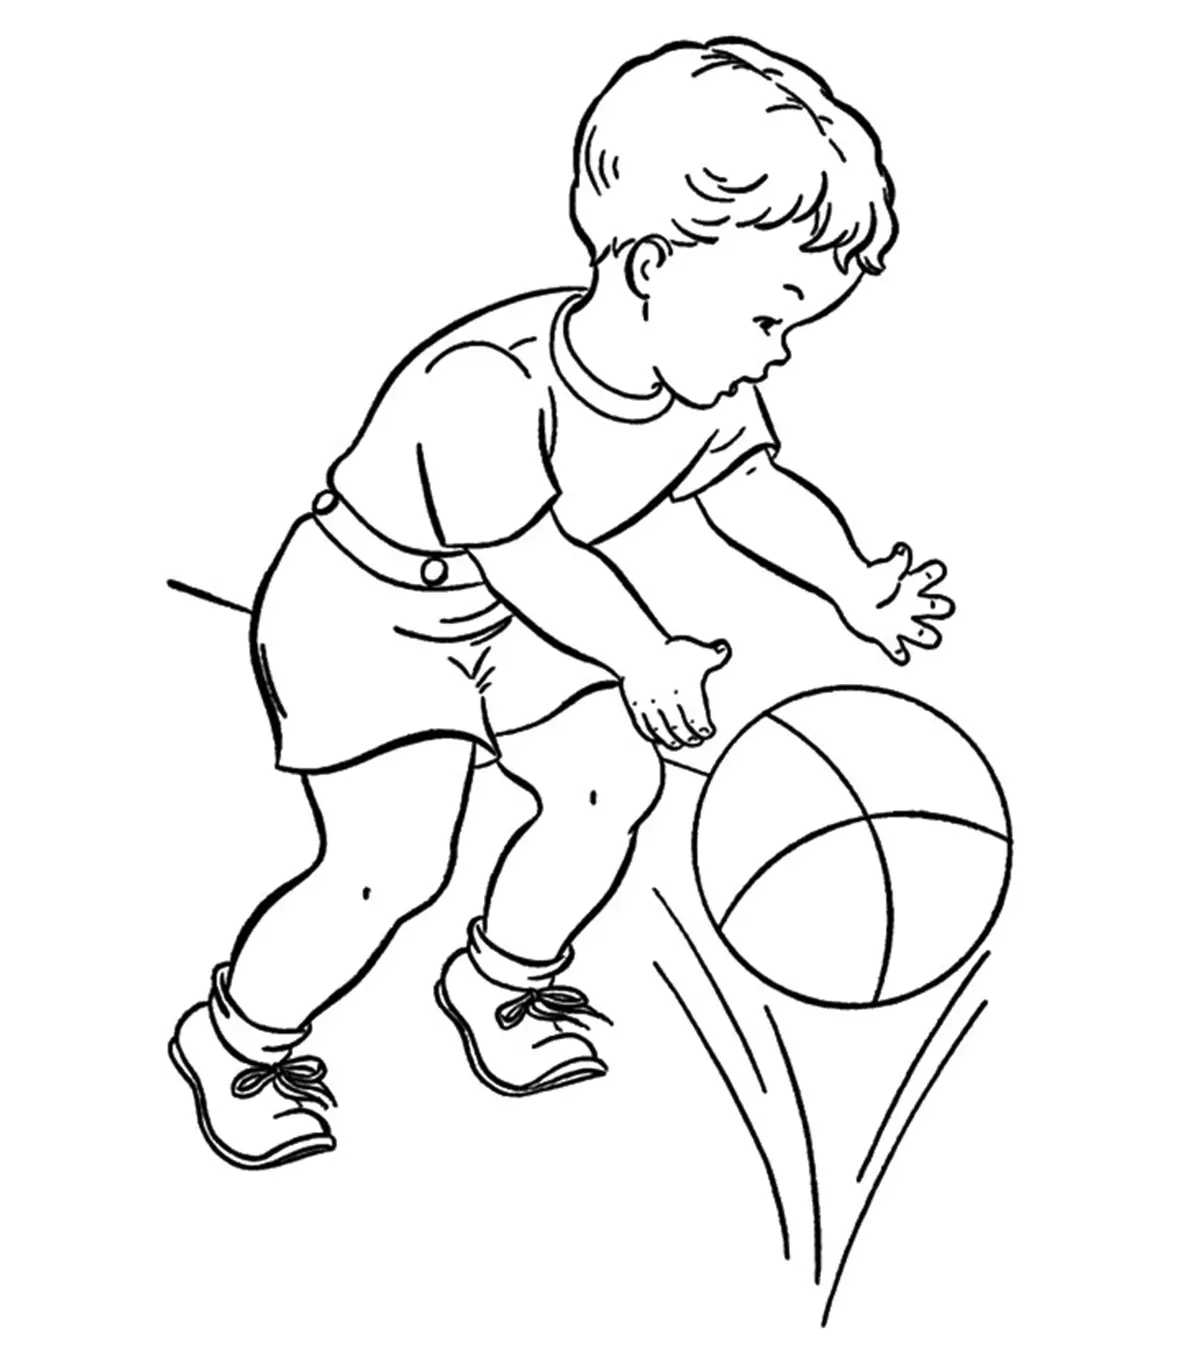 Top 20 Basketball Coloring Pages For Your Little Ones